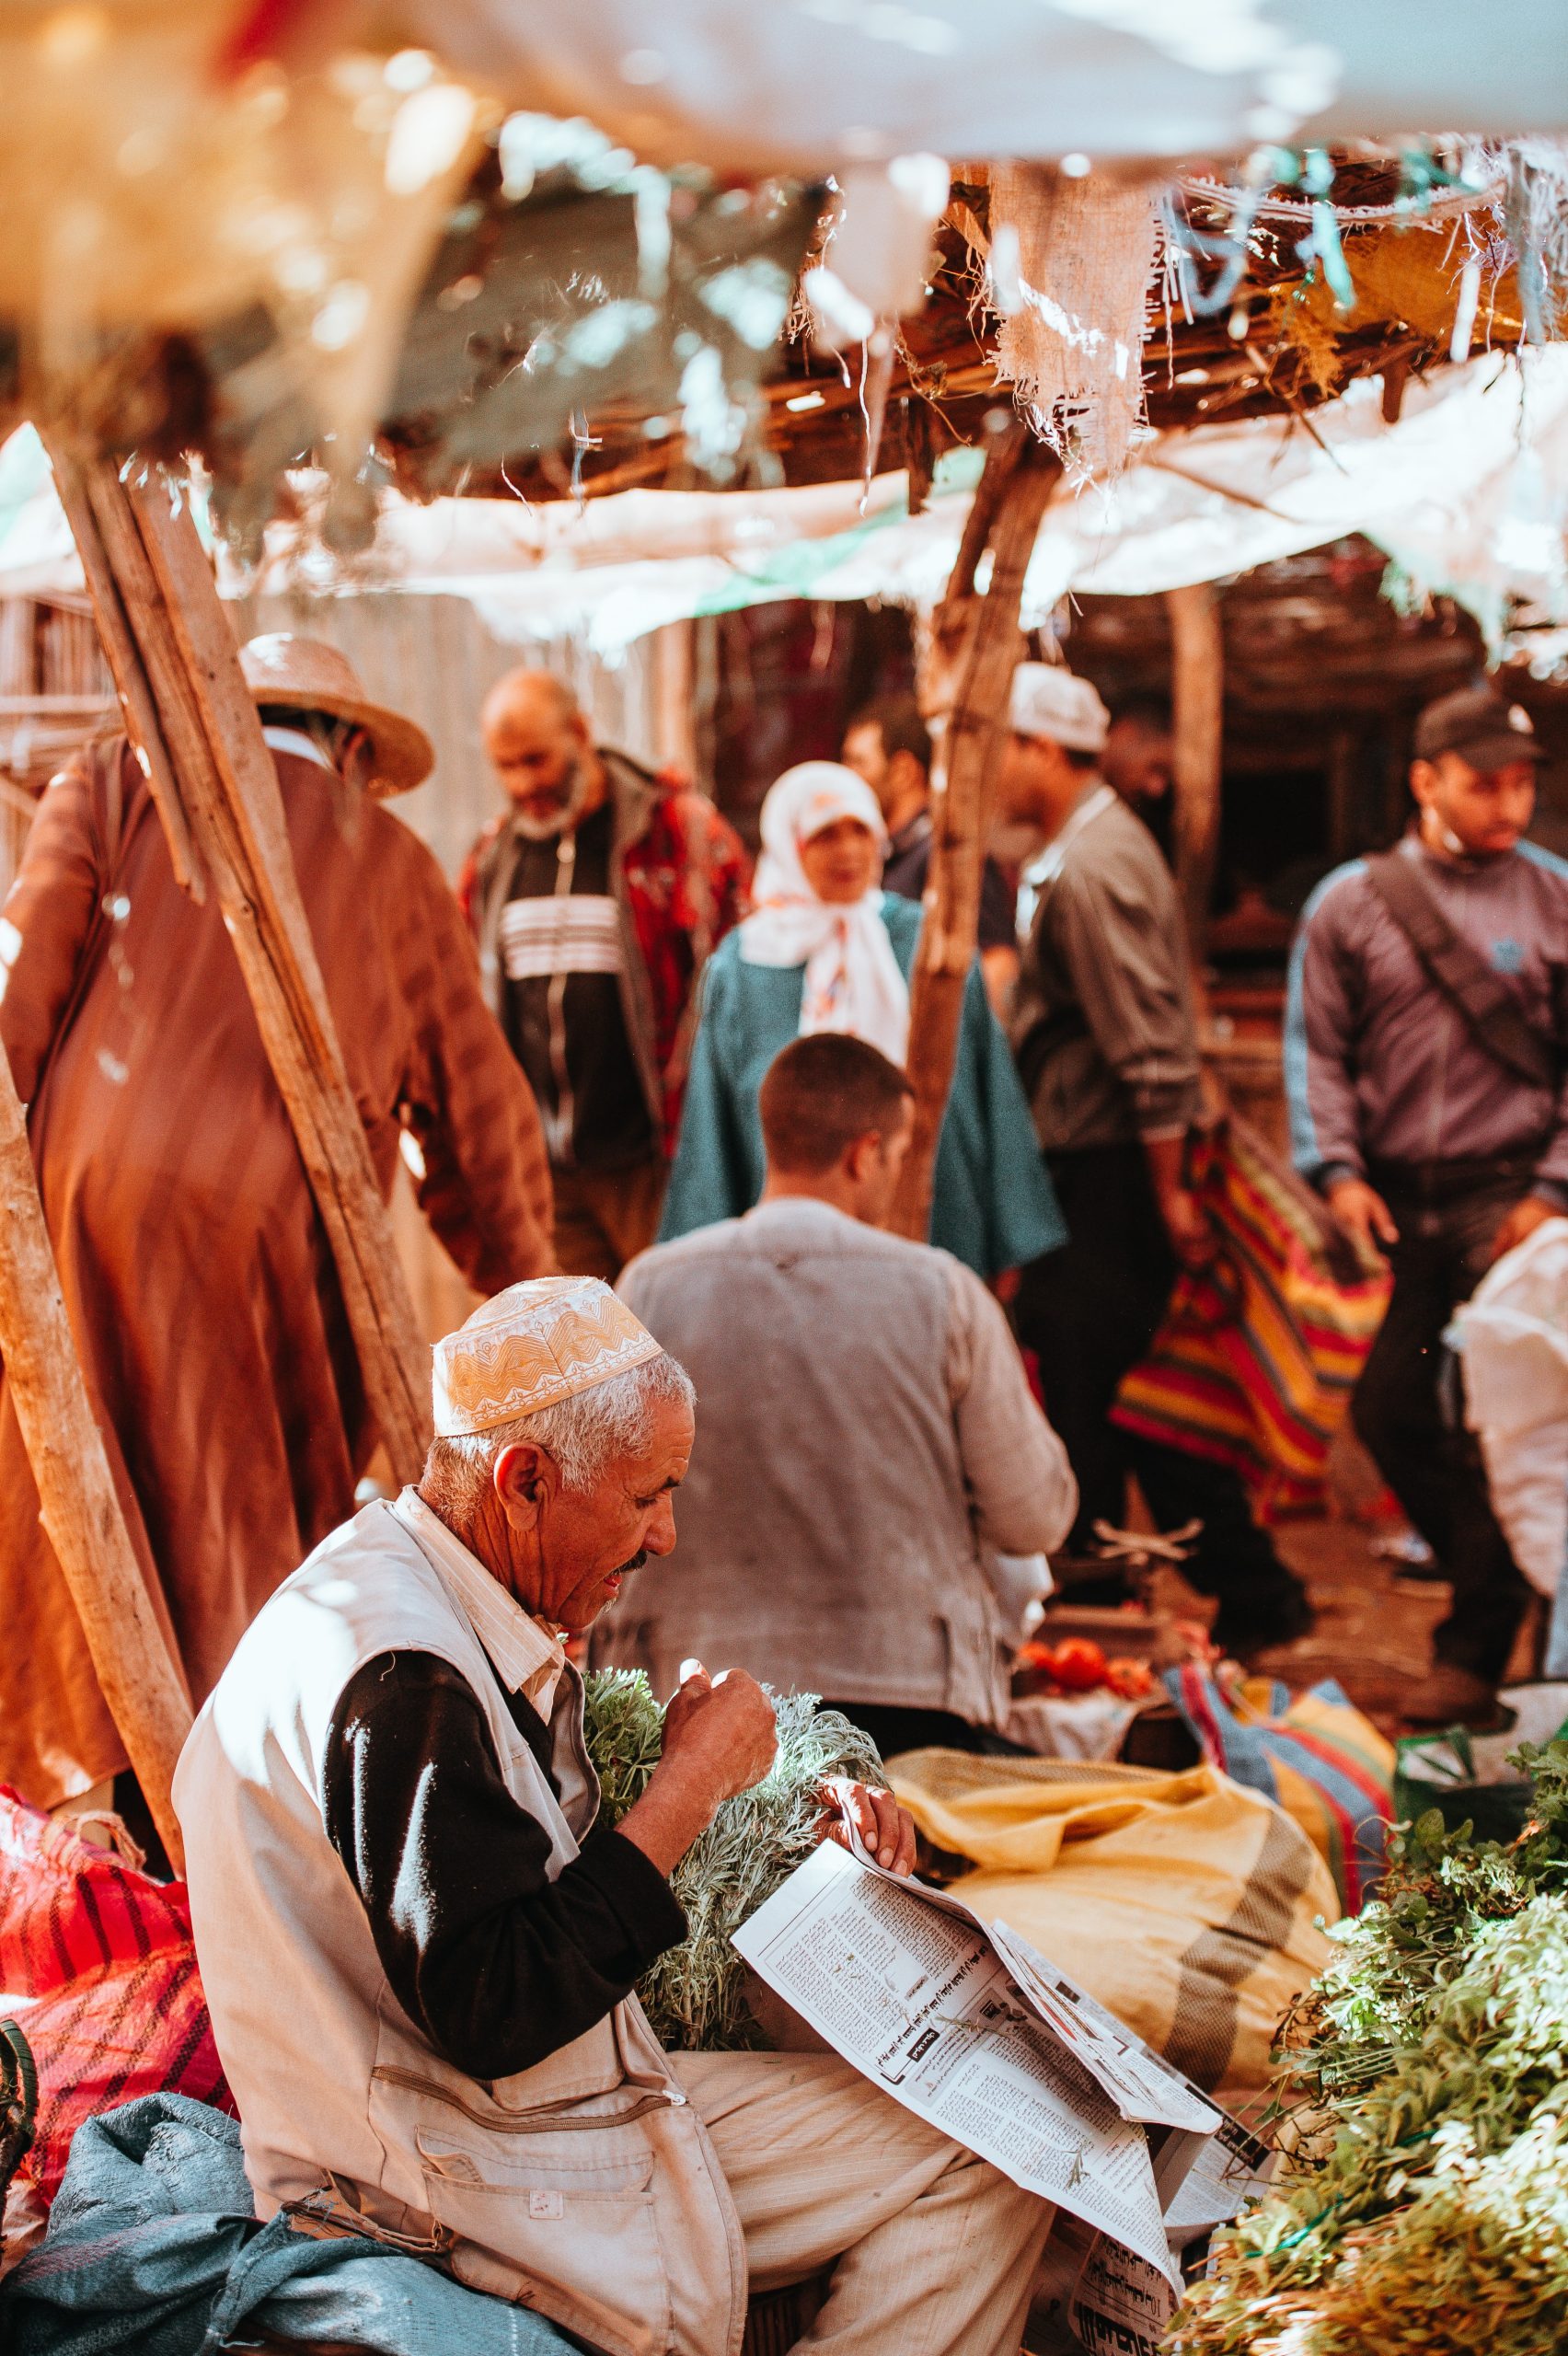 What You Need to Know Before Visiting Morocco